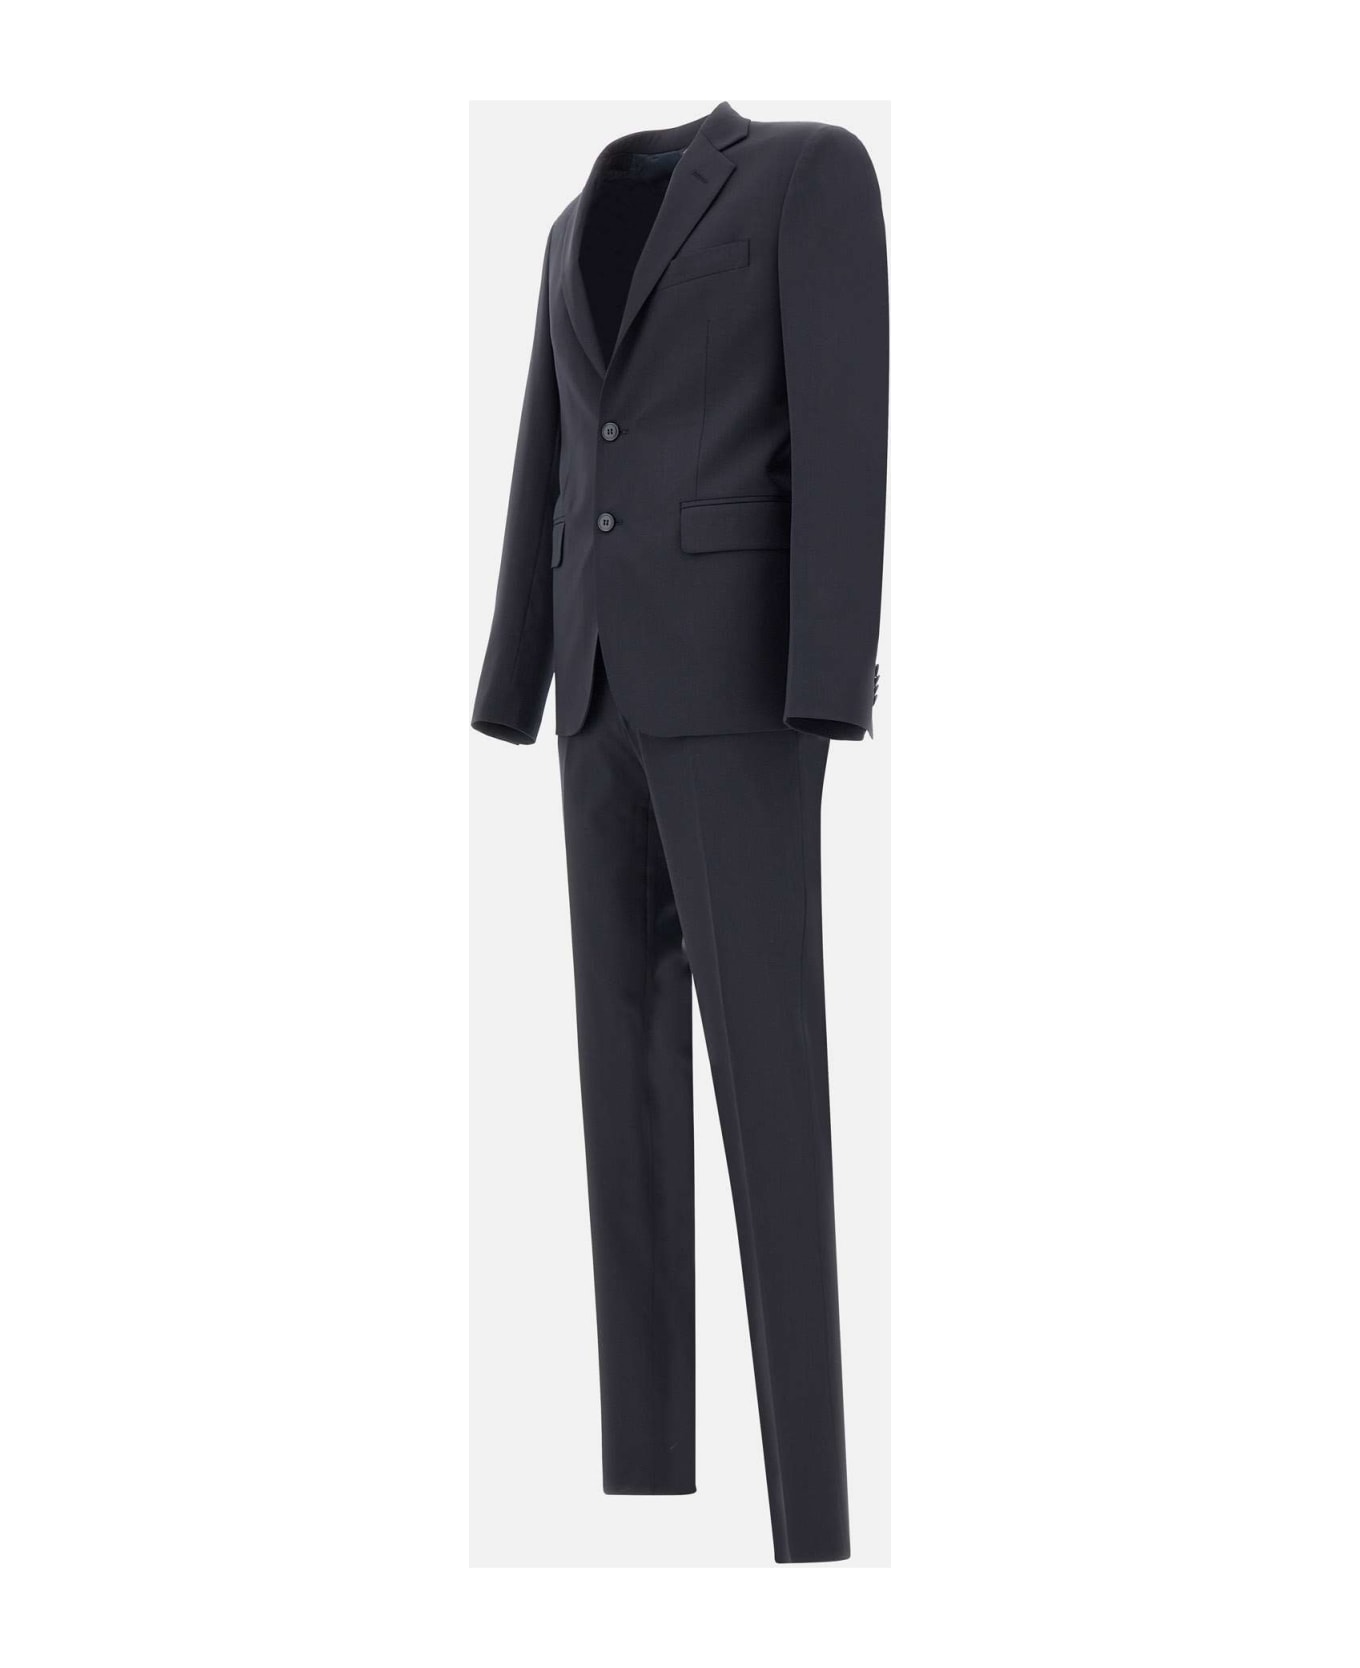 Brian Dales "ga87" Suit Two-piece Cool Wool - BLUE